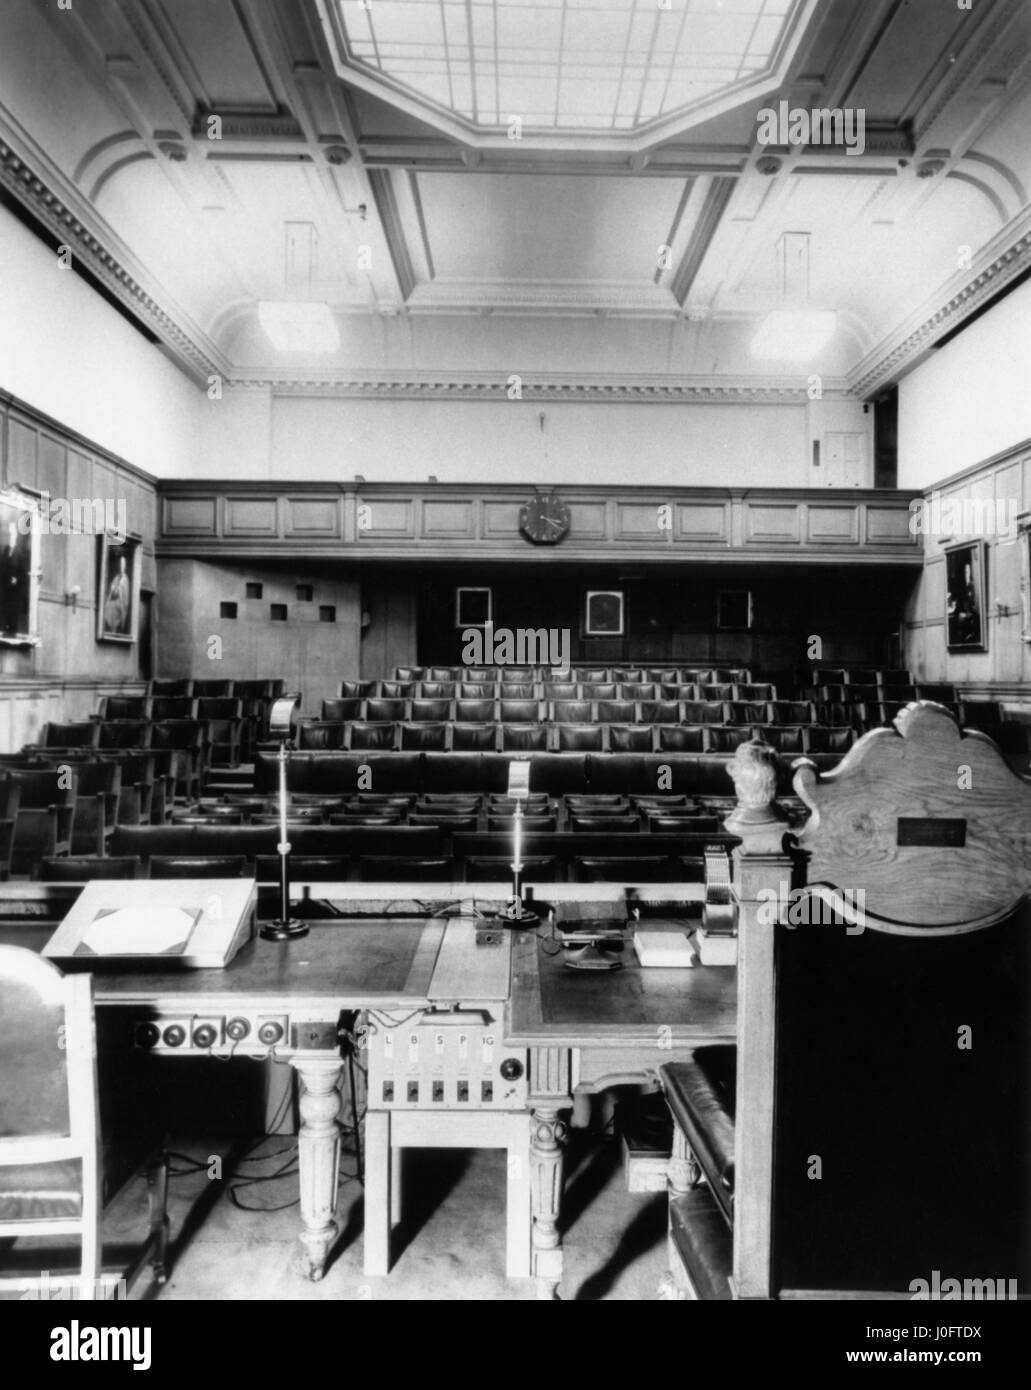 Institution of Mechanical Engineers headquarters, lecture Hall showing public address installations Stock Photo